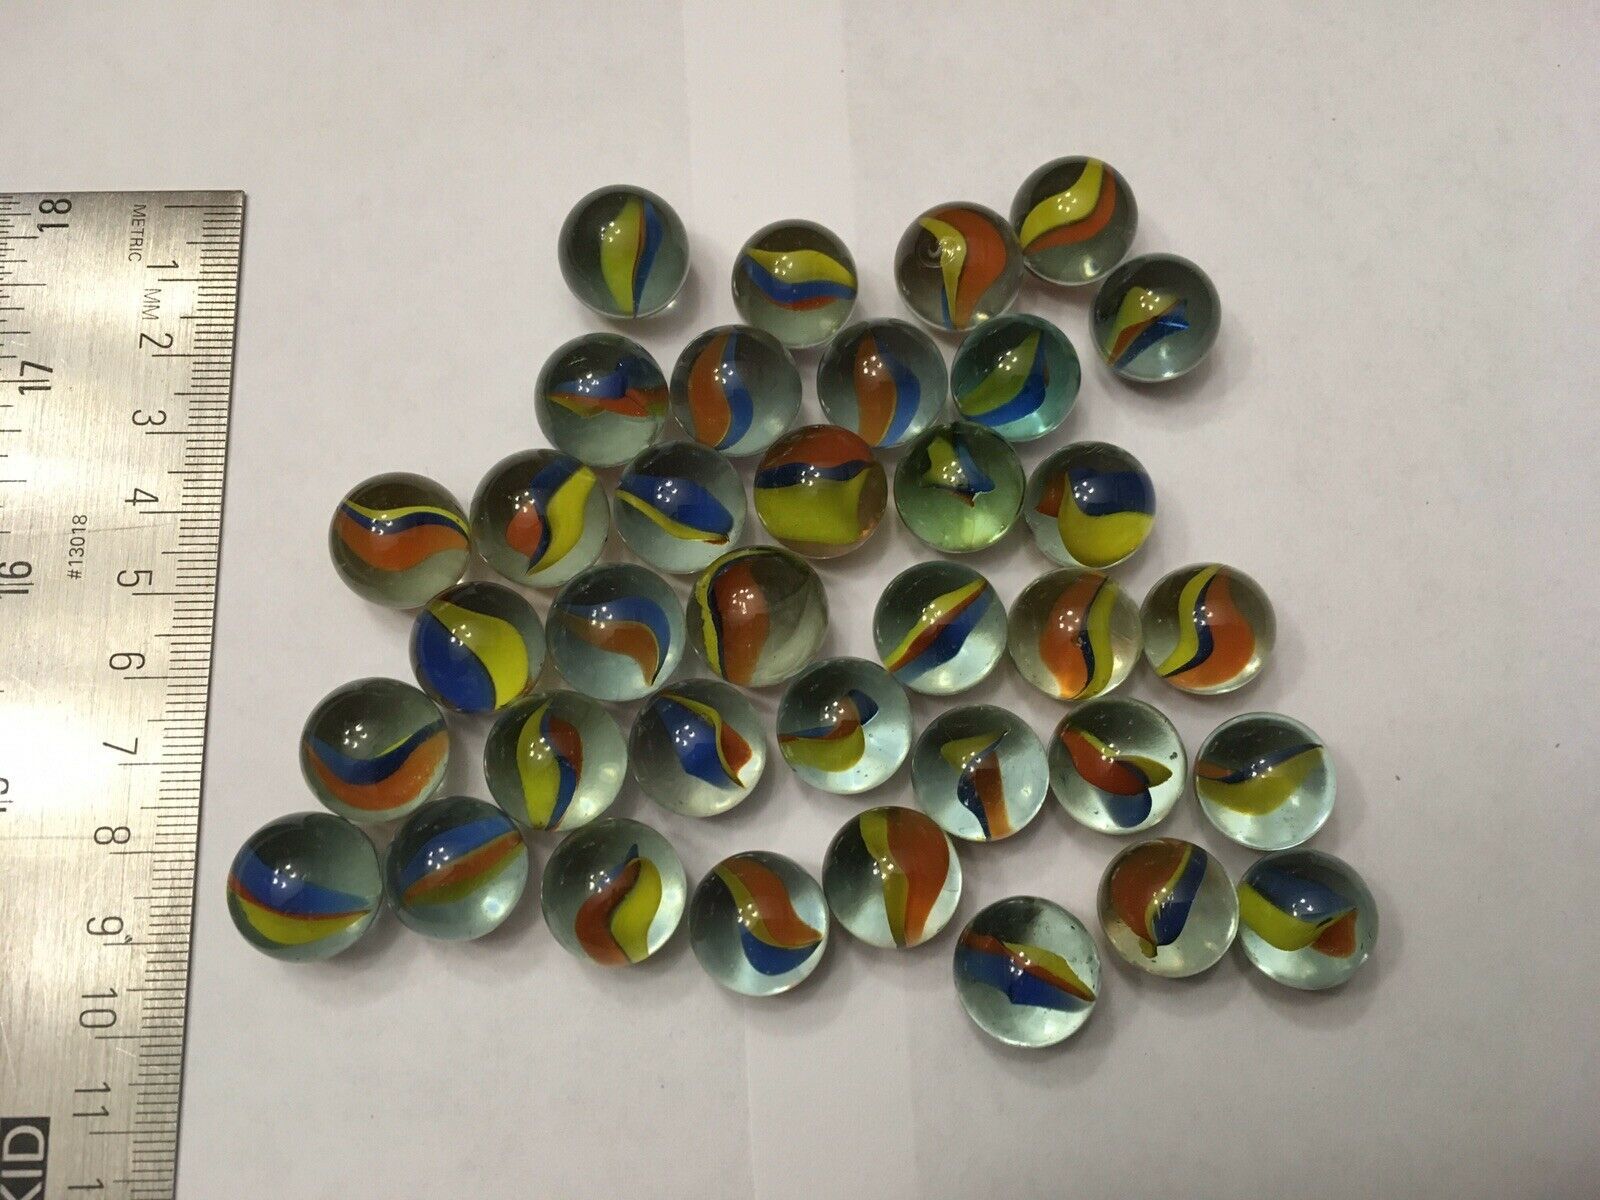 2 POUNDS 5/8 INCH TRI-COLOR CATS EYE MEGA VACOR MARBLES FREE SHIPPING 